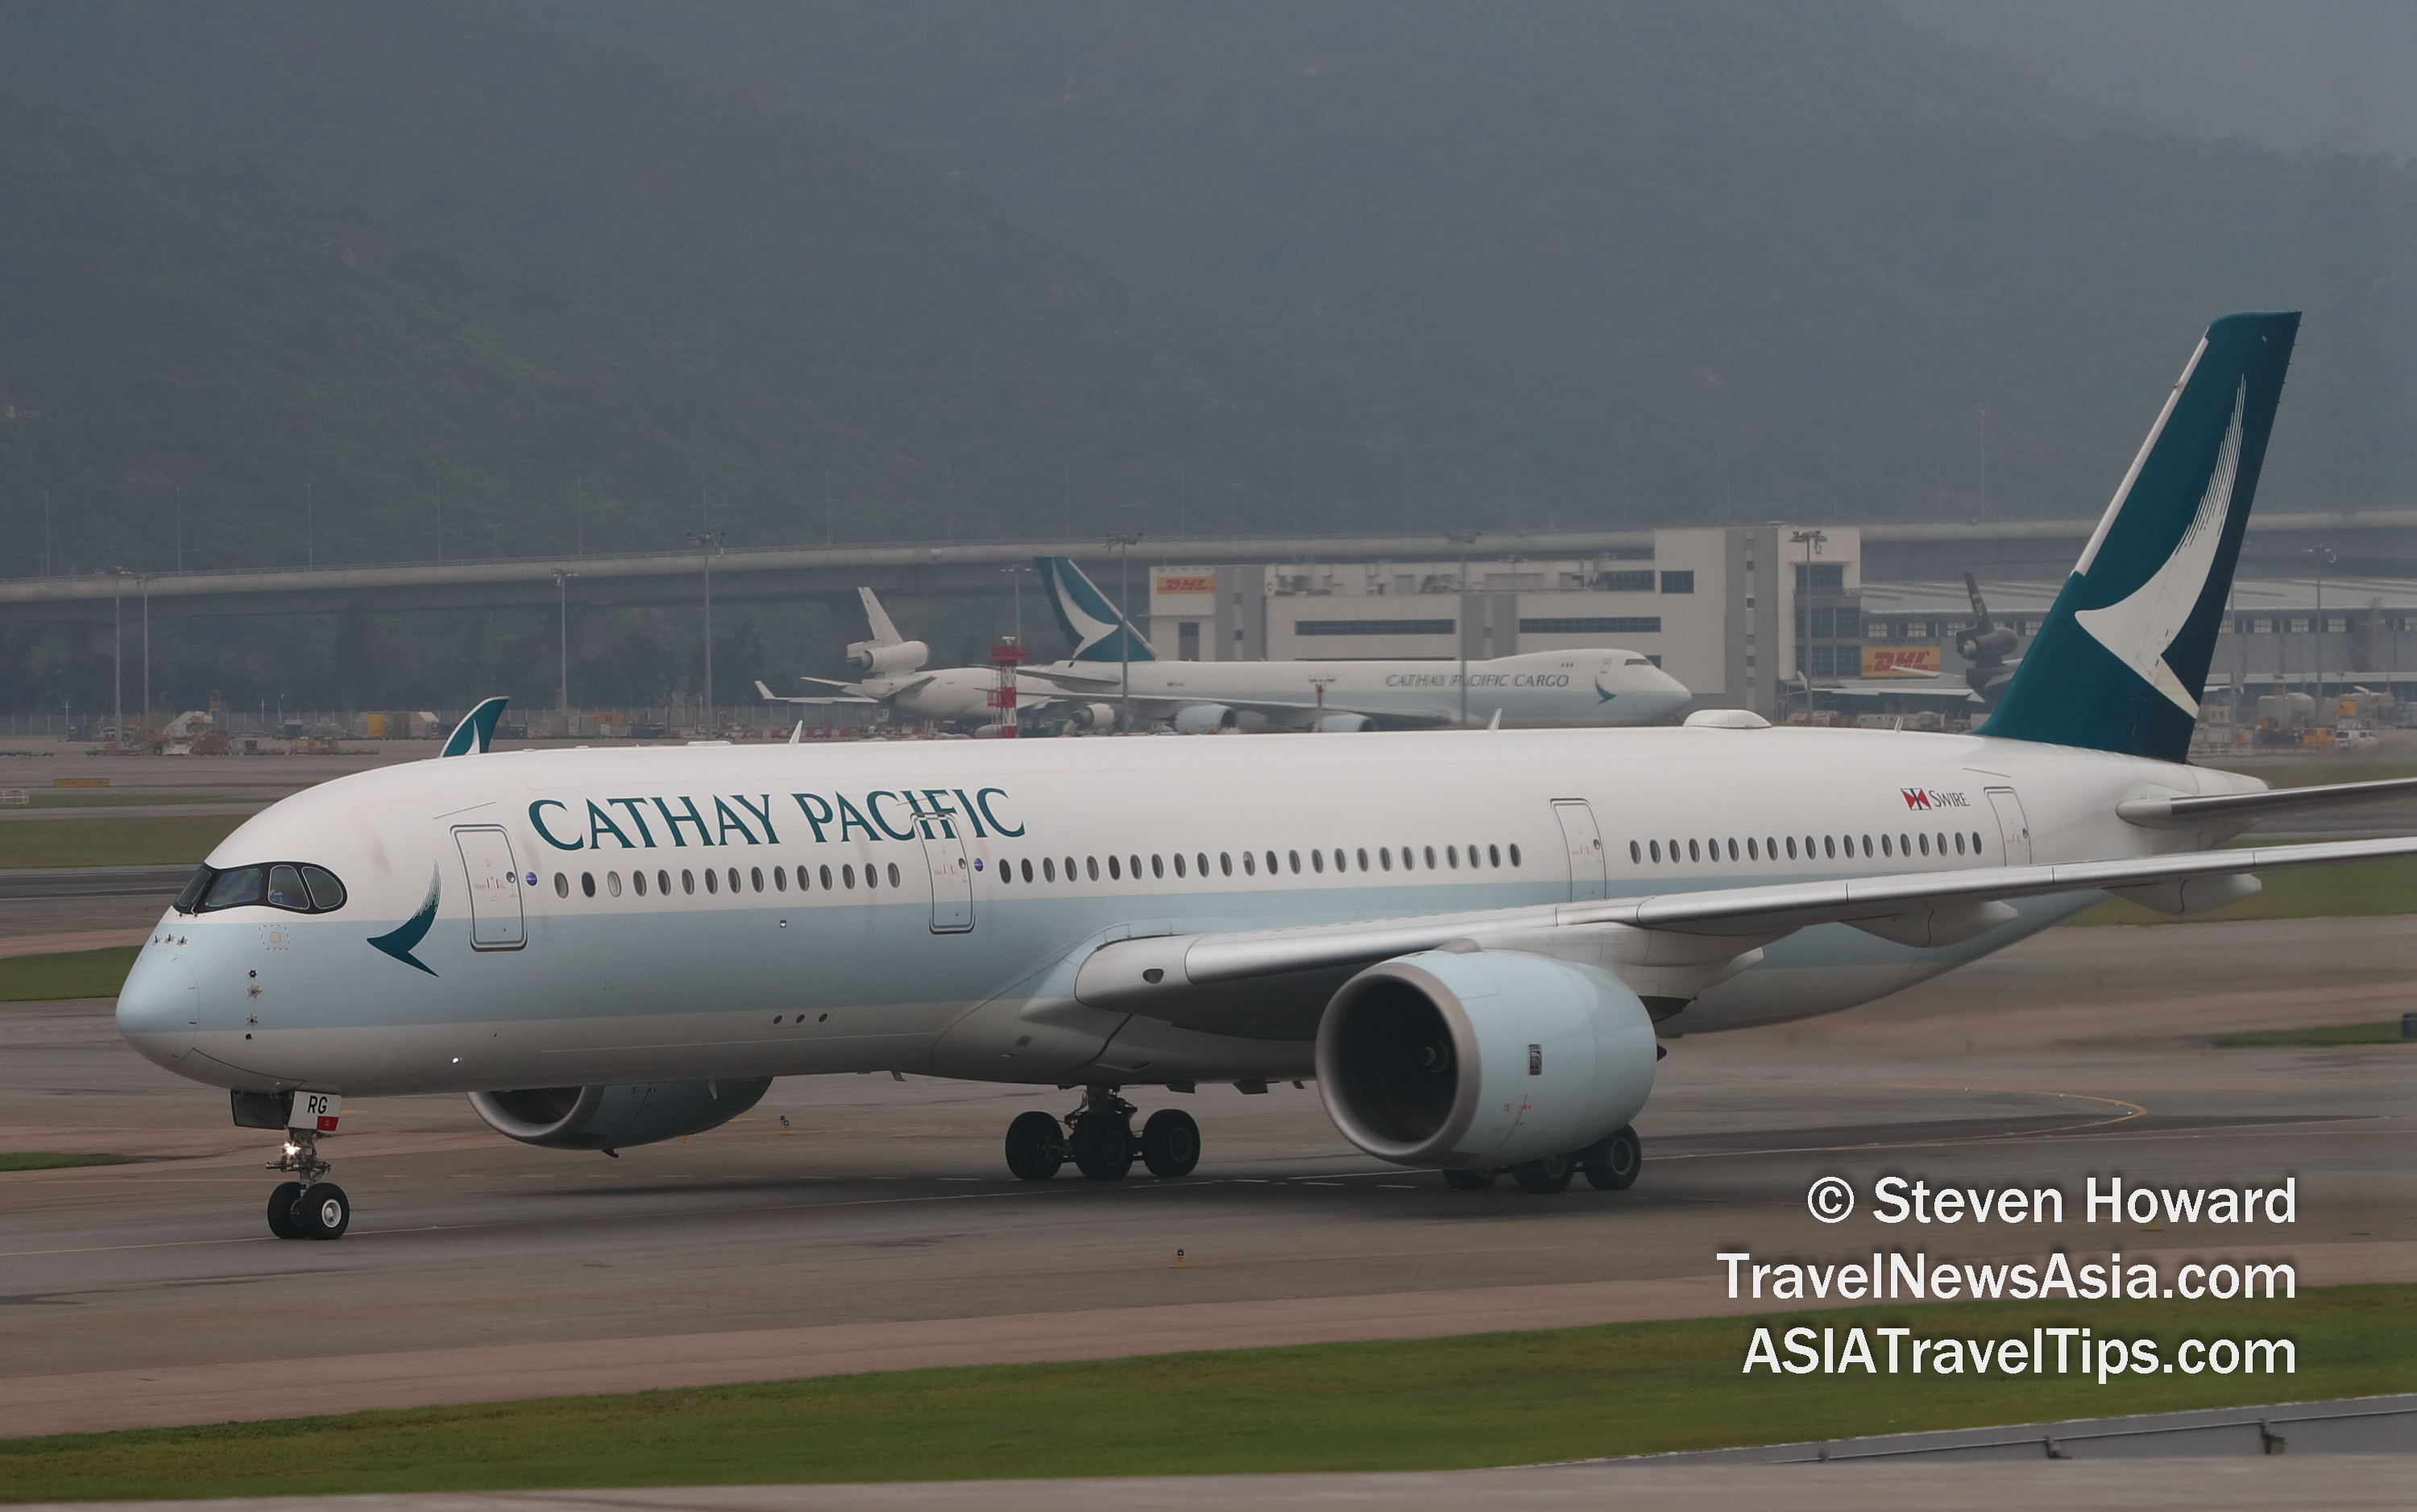 Cathay Pacific Airbus A350 and B747F at HKIA. Picture by Steven Howard of TravelNewsAsia.com Click to enlarge.